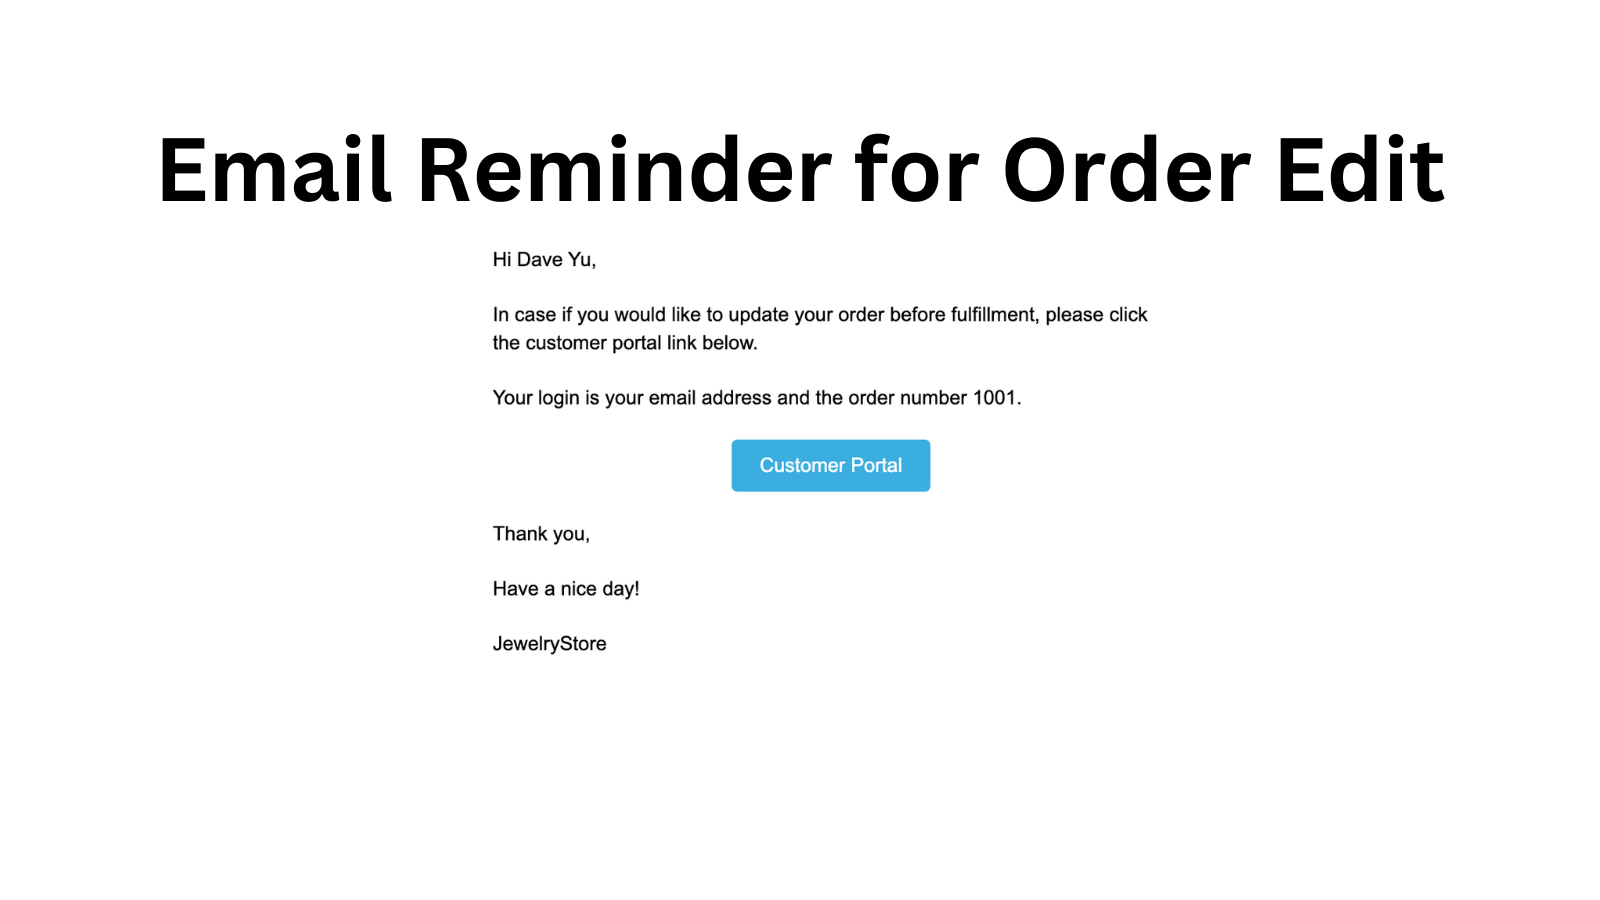 Email for Order Edits